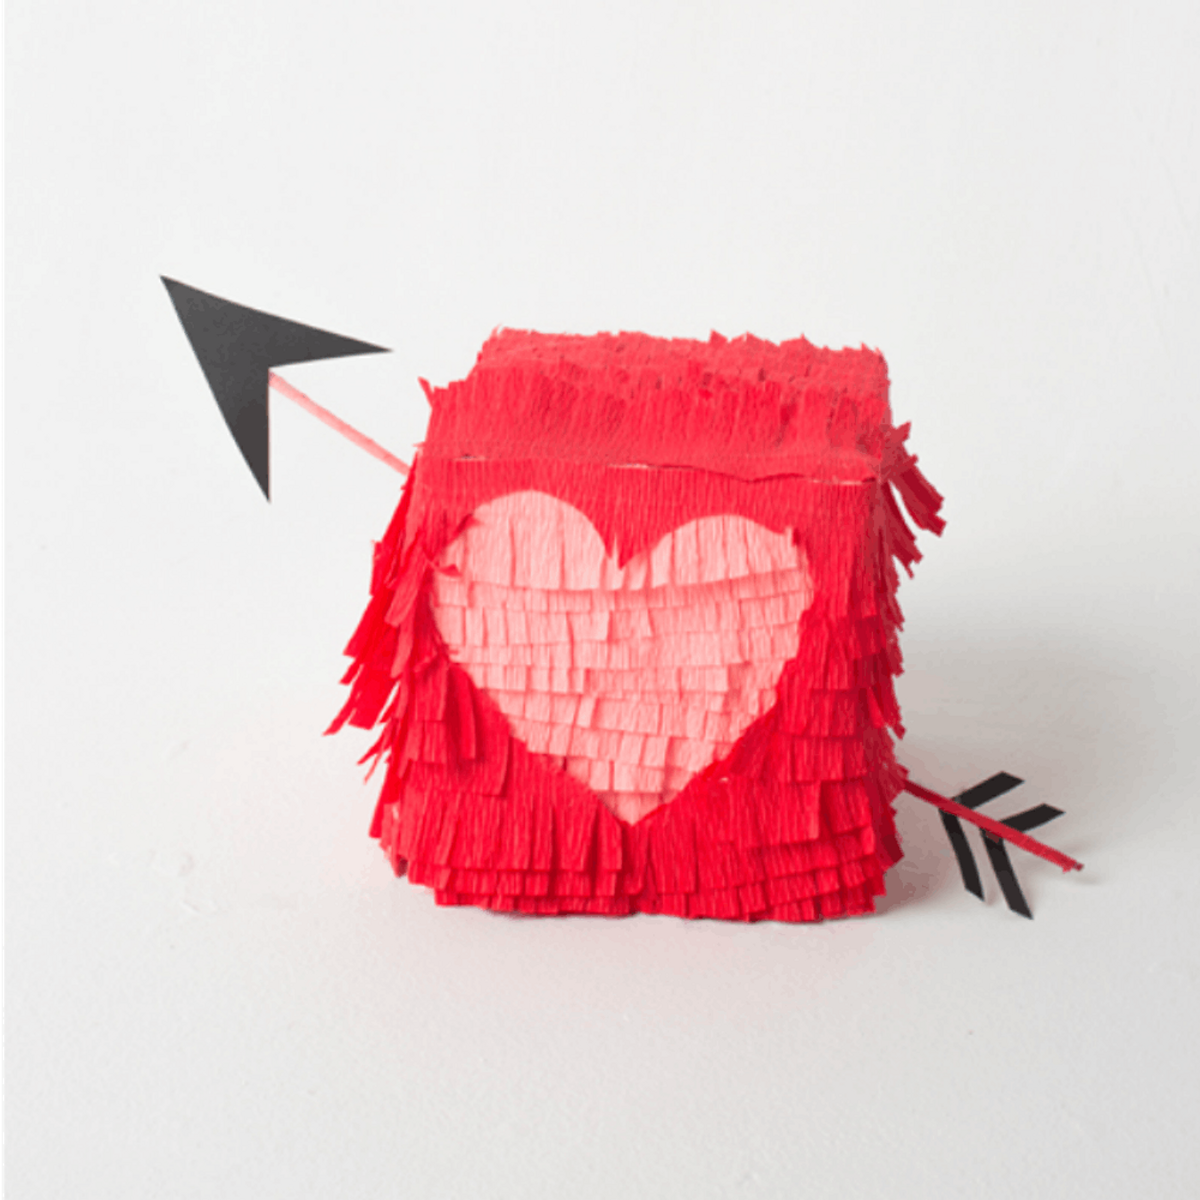 Win V-Day With 15 DIY Valentine Gift Boxes